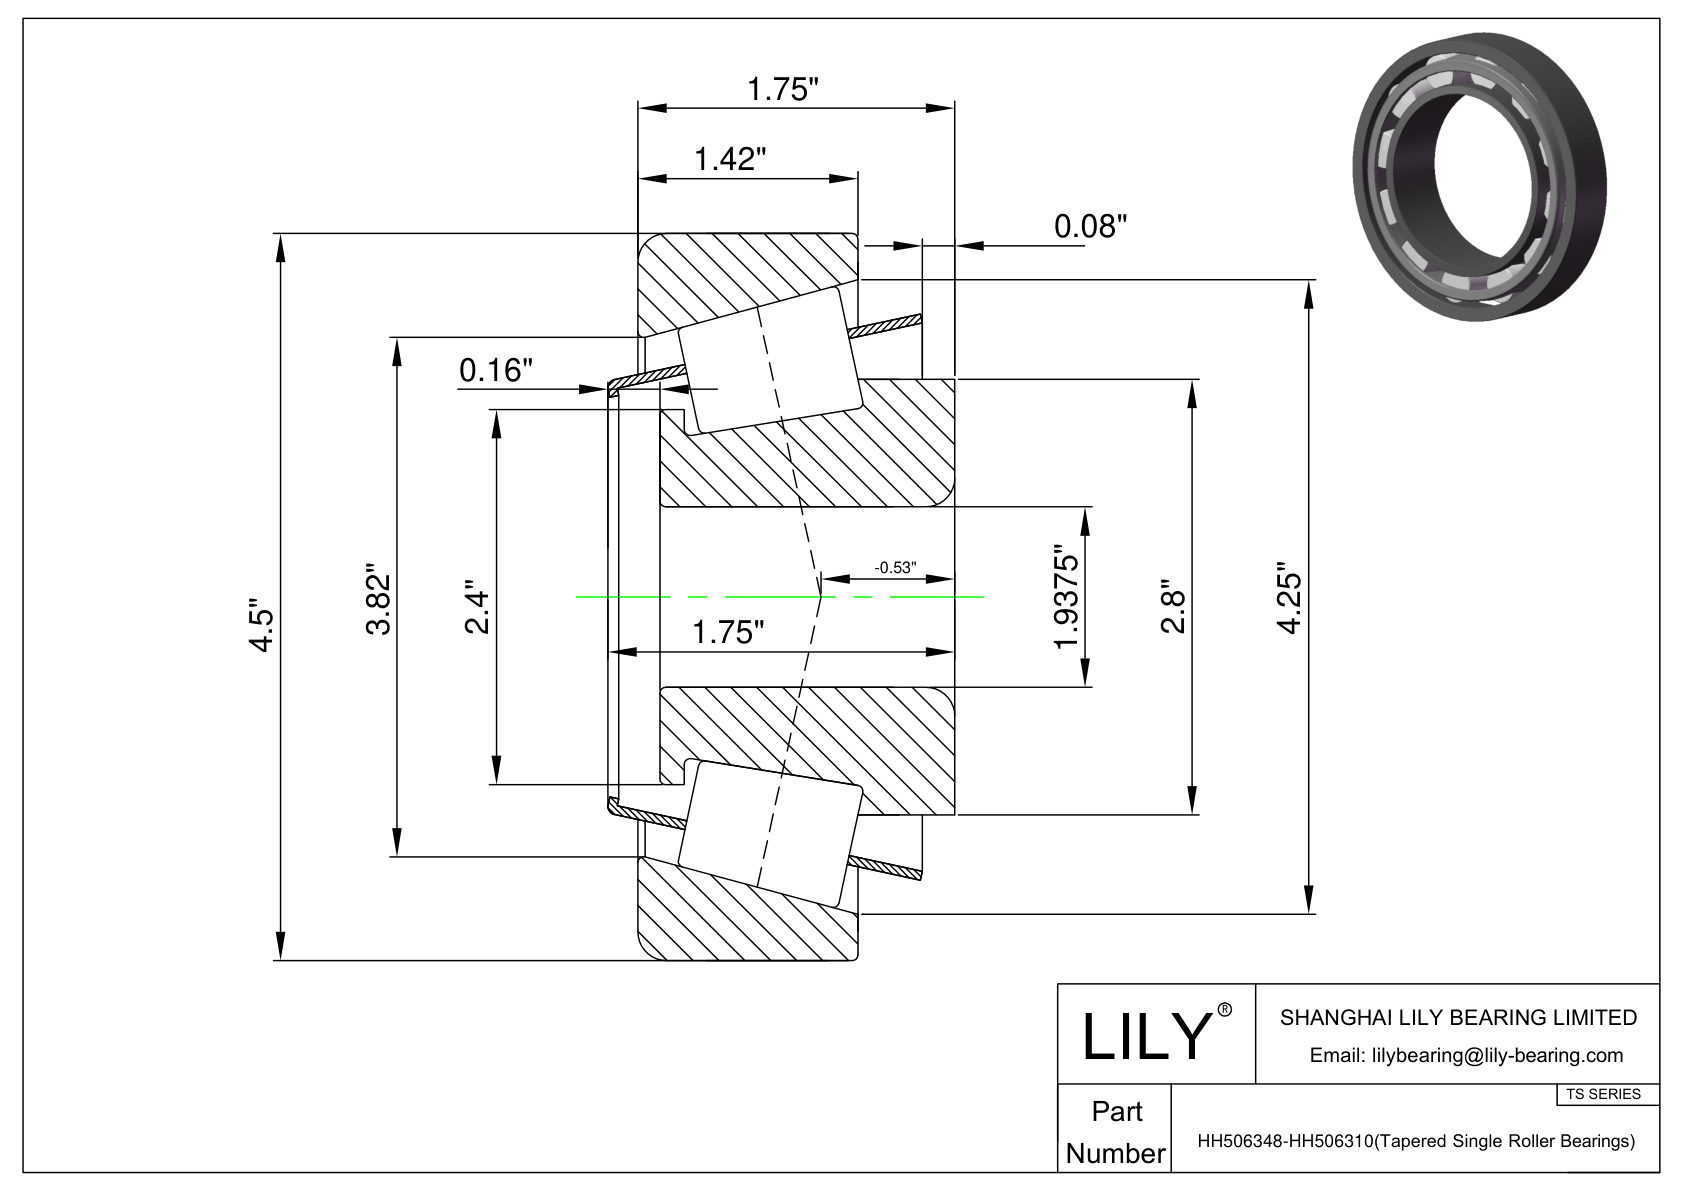 HH506348-HH506310 TS (Tapered Single Roller Bearings) (Imperial) cad drawing